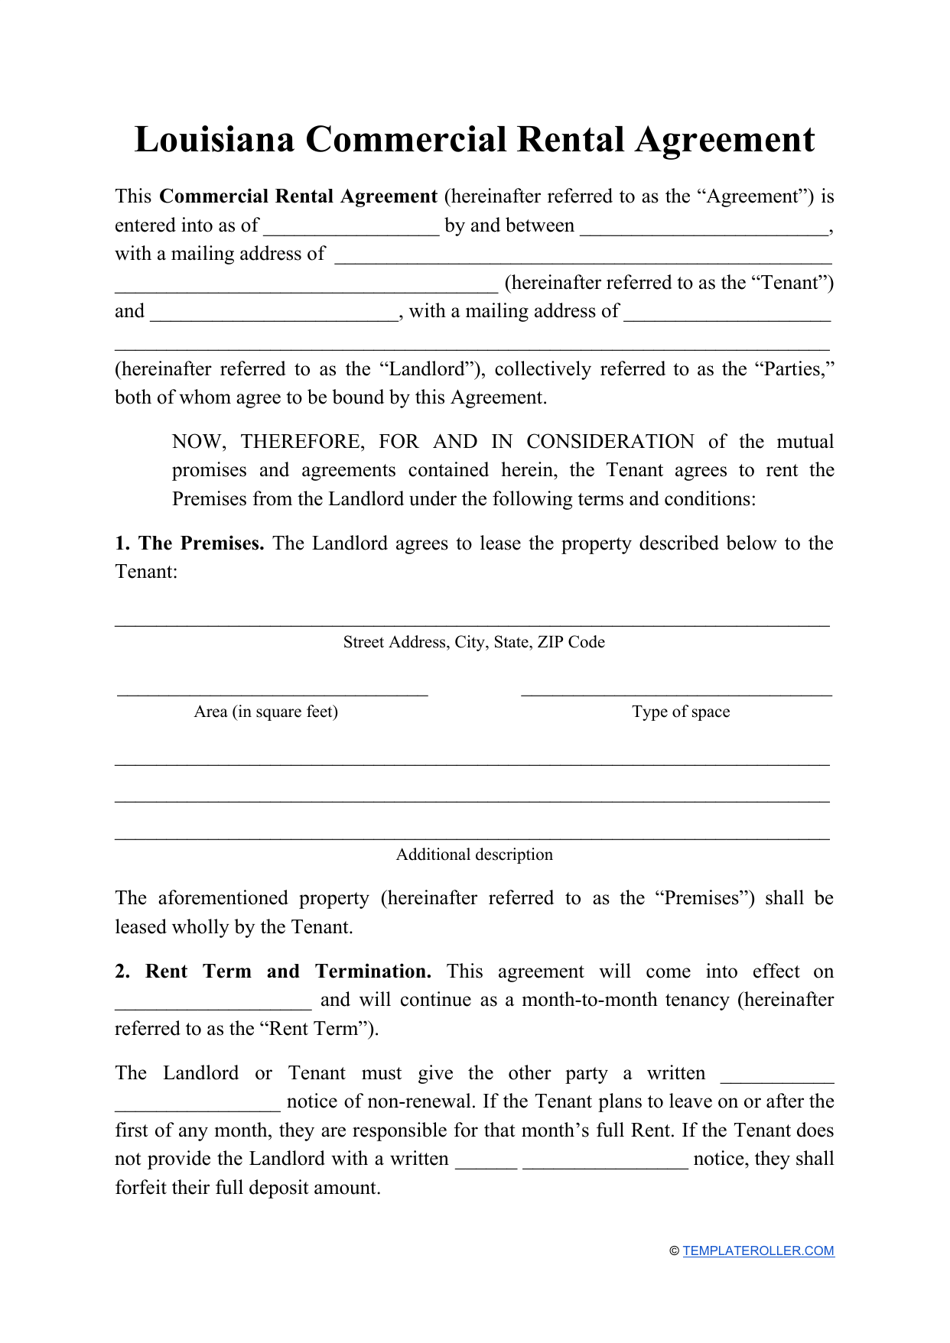 Commercial Rental Agreement Template - Louisiana, Page 1